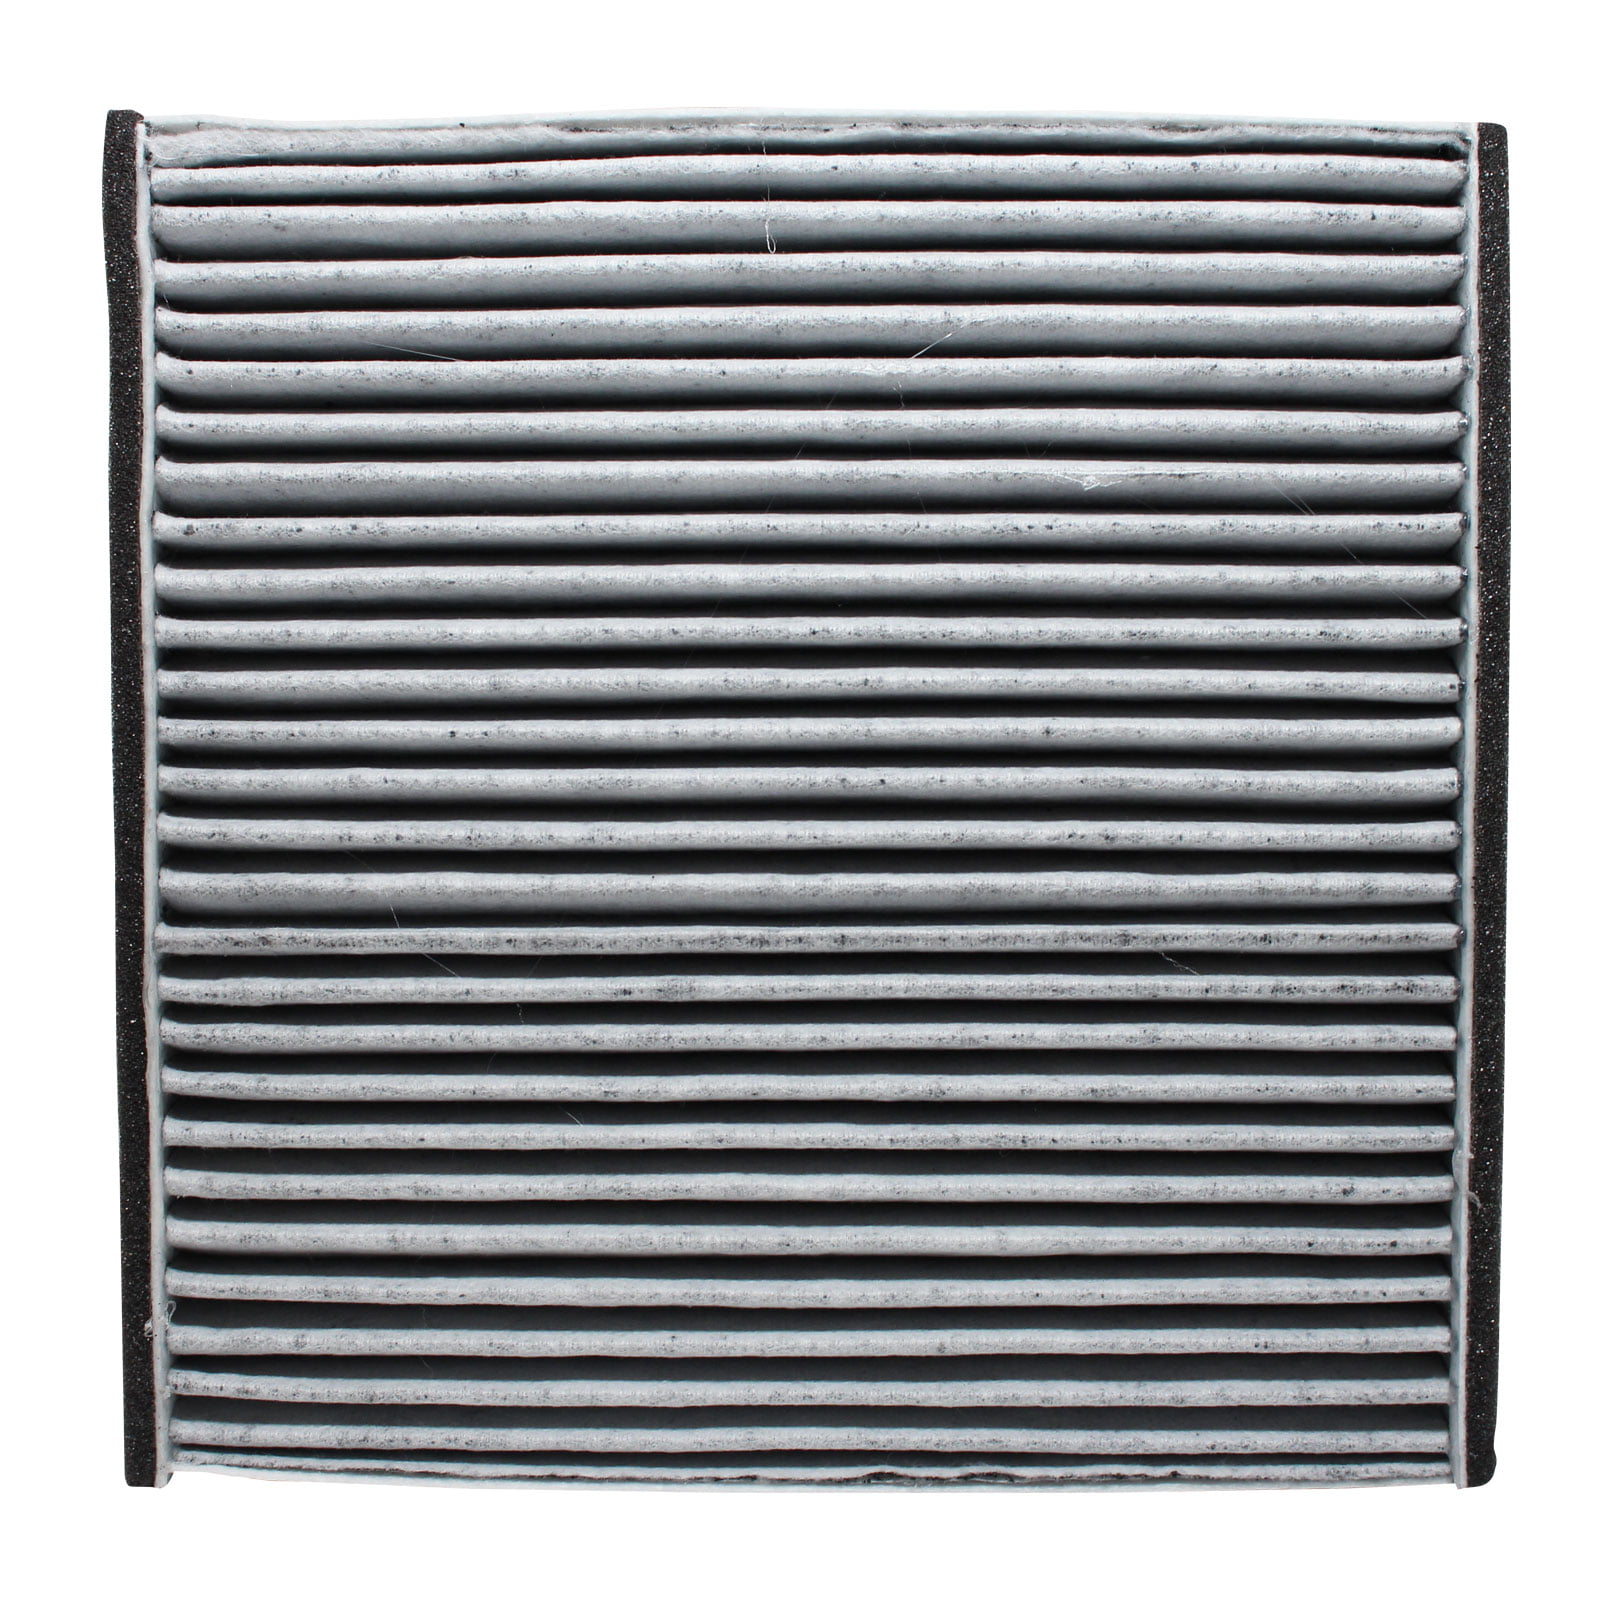 Useful Cabin Air Filter Fit for Toyota Camry 02-06 Lexus ES300 ES330 RX330 RX350